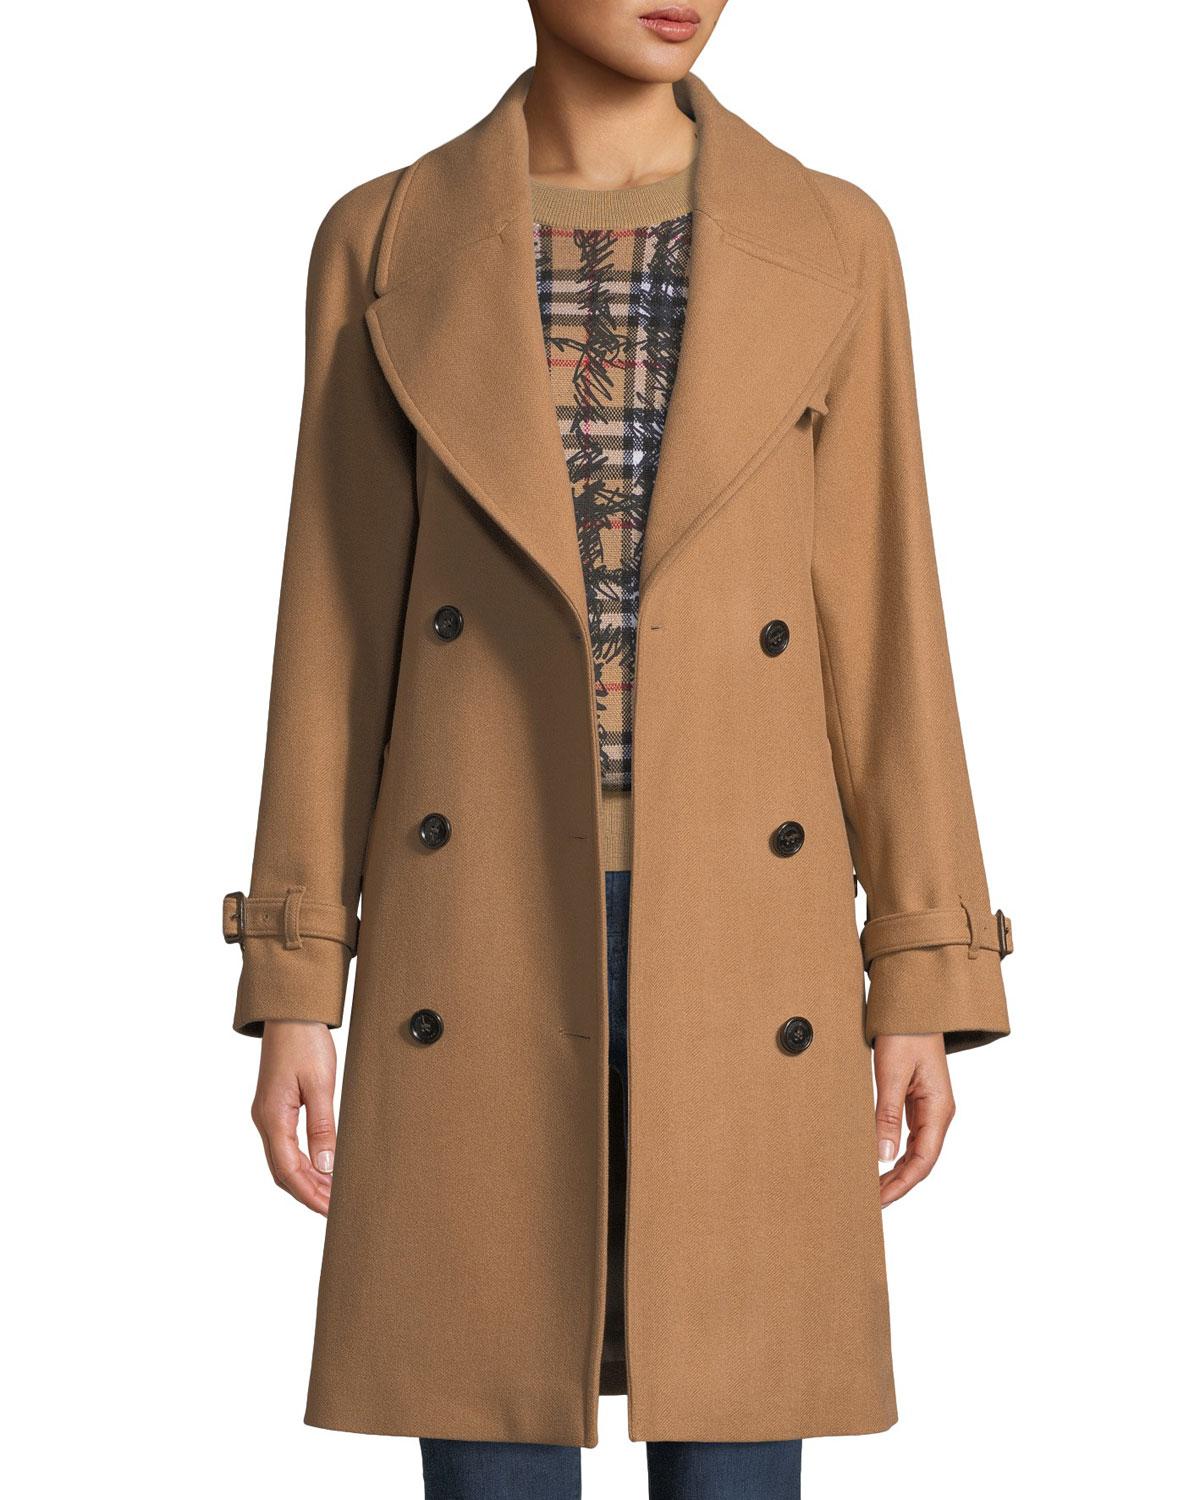 Burberry Cranston Wool-blend Short Trench Coat in Camel (Natural) - Lyst